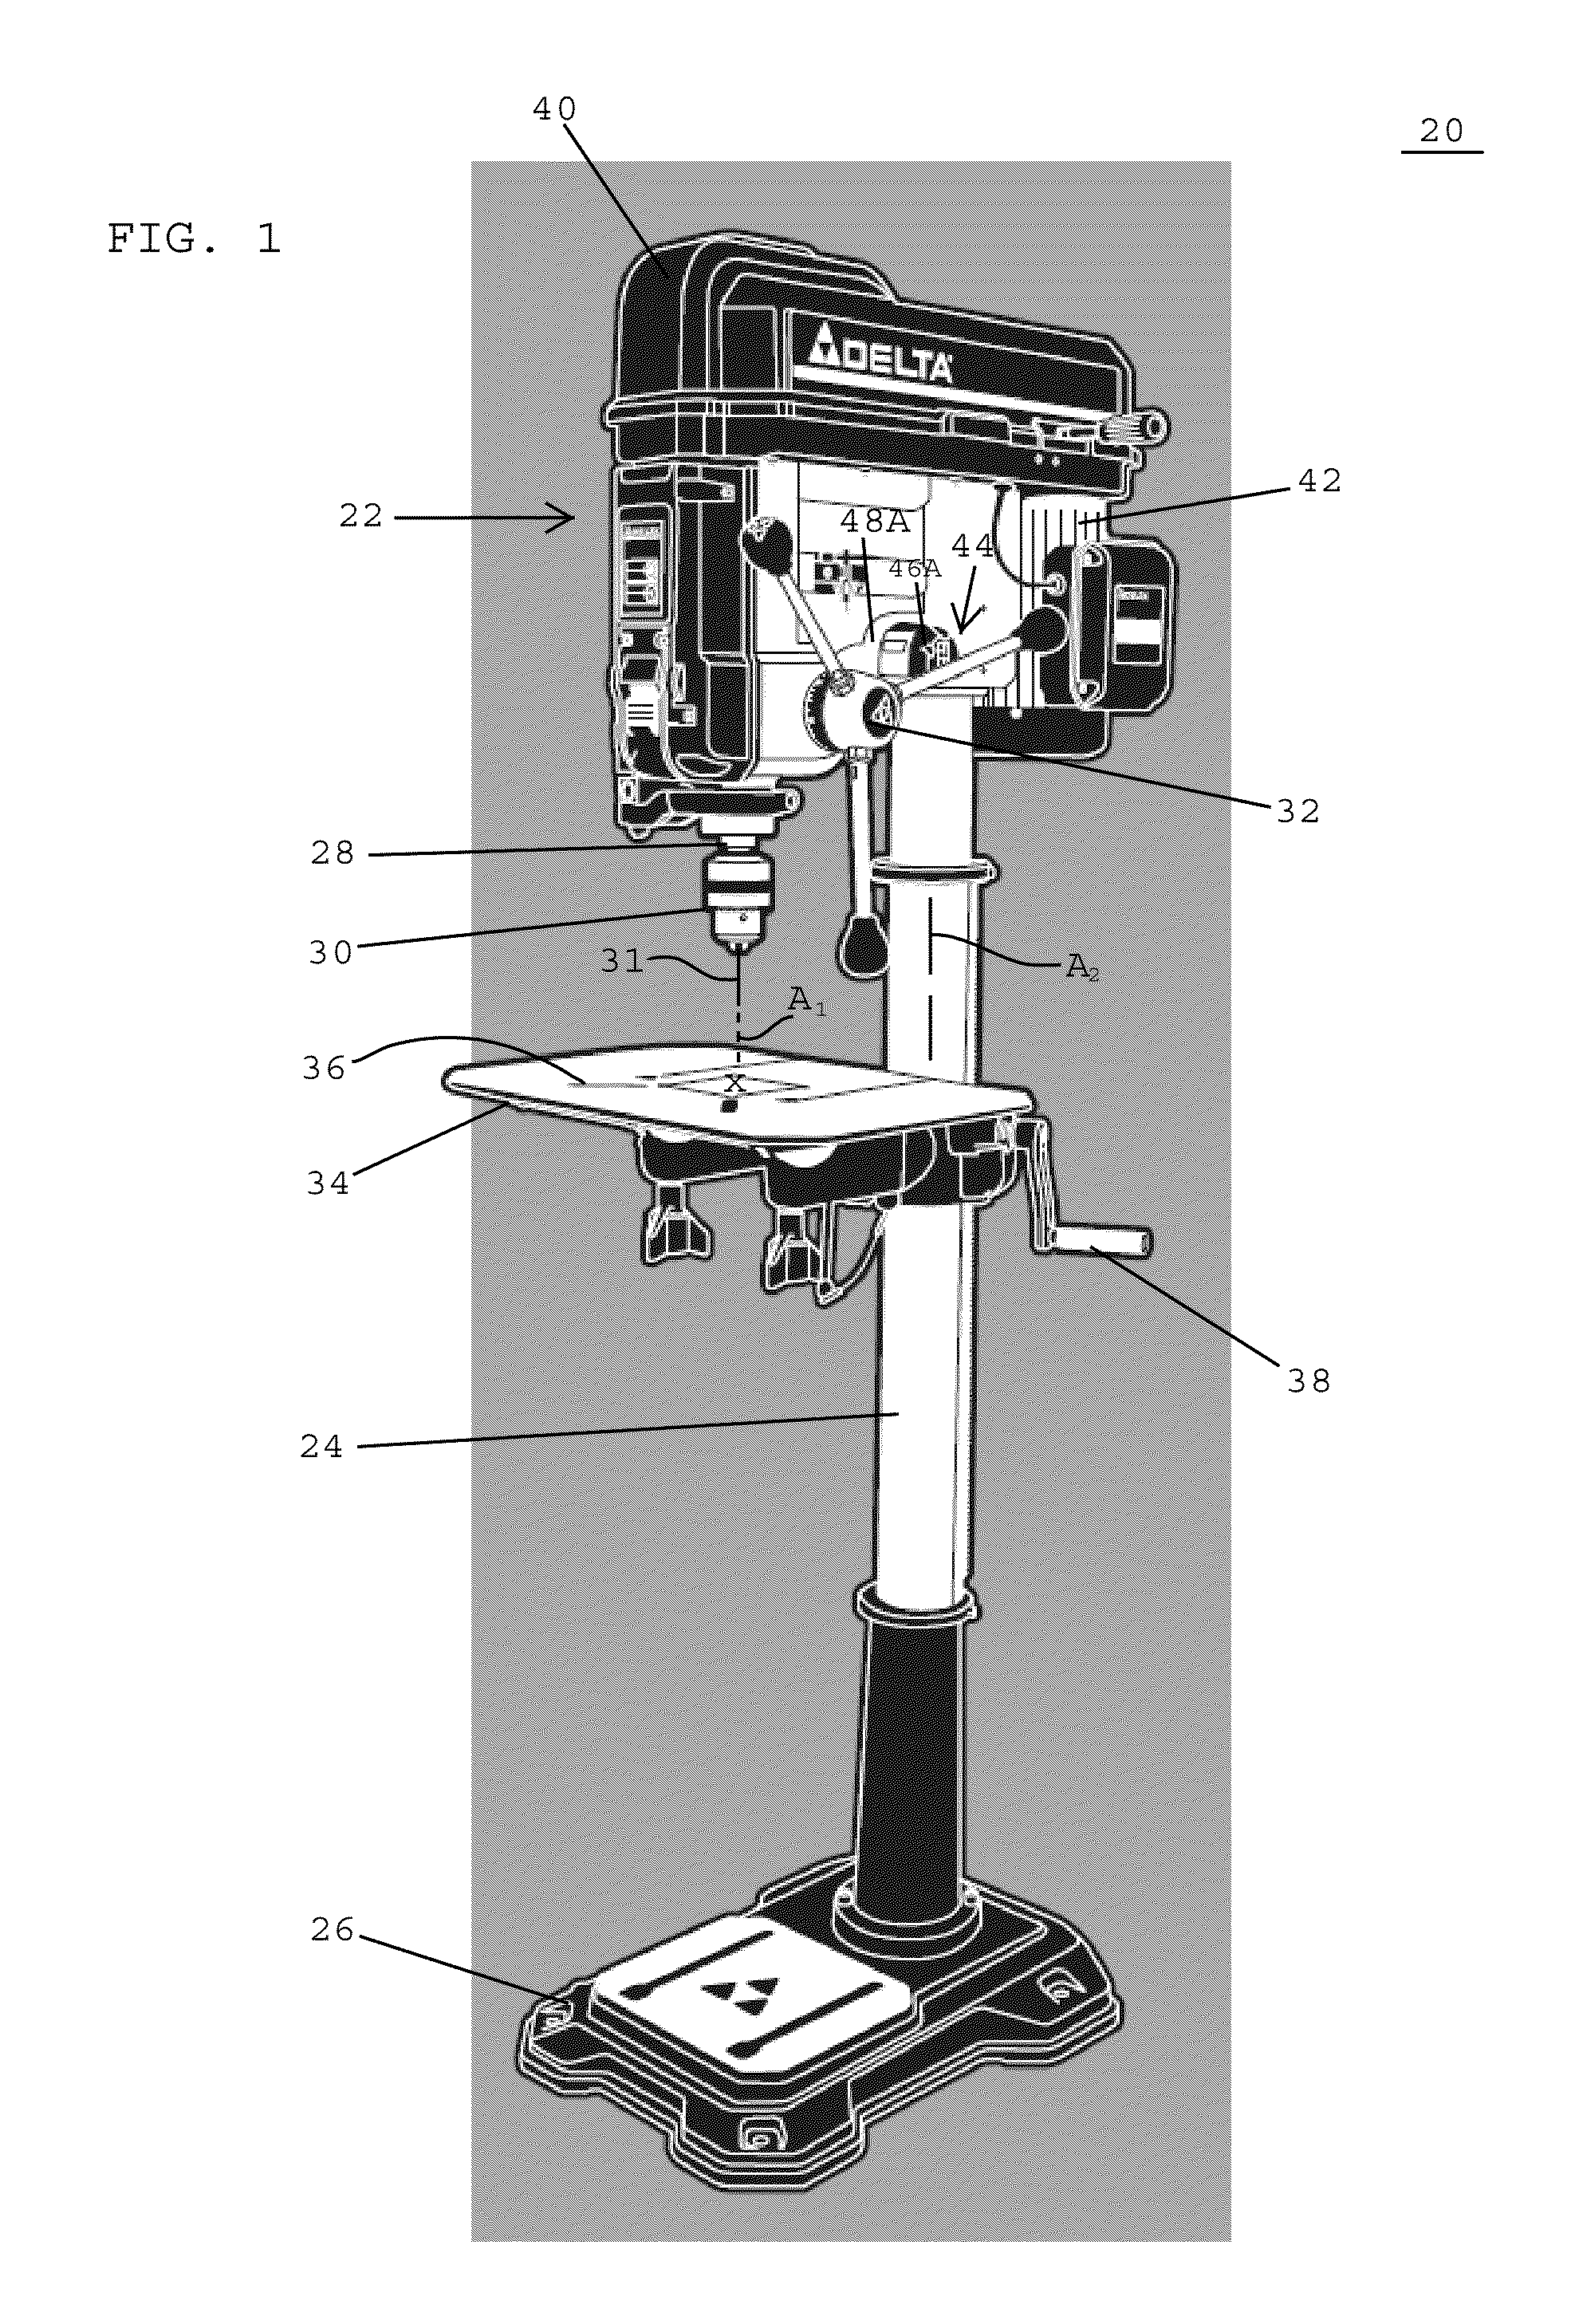 Drill presses having laser alignment systems and methods therefor